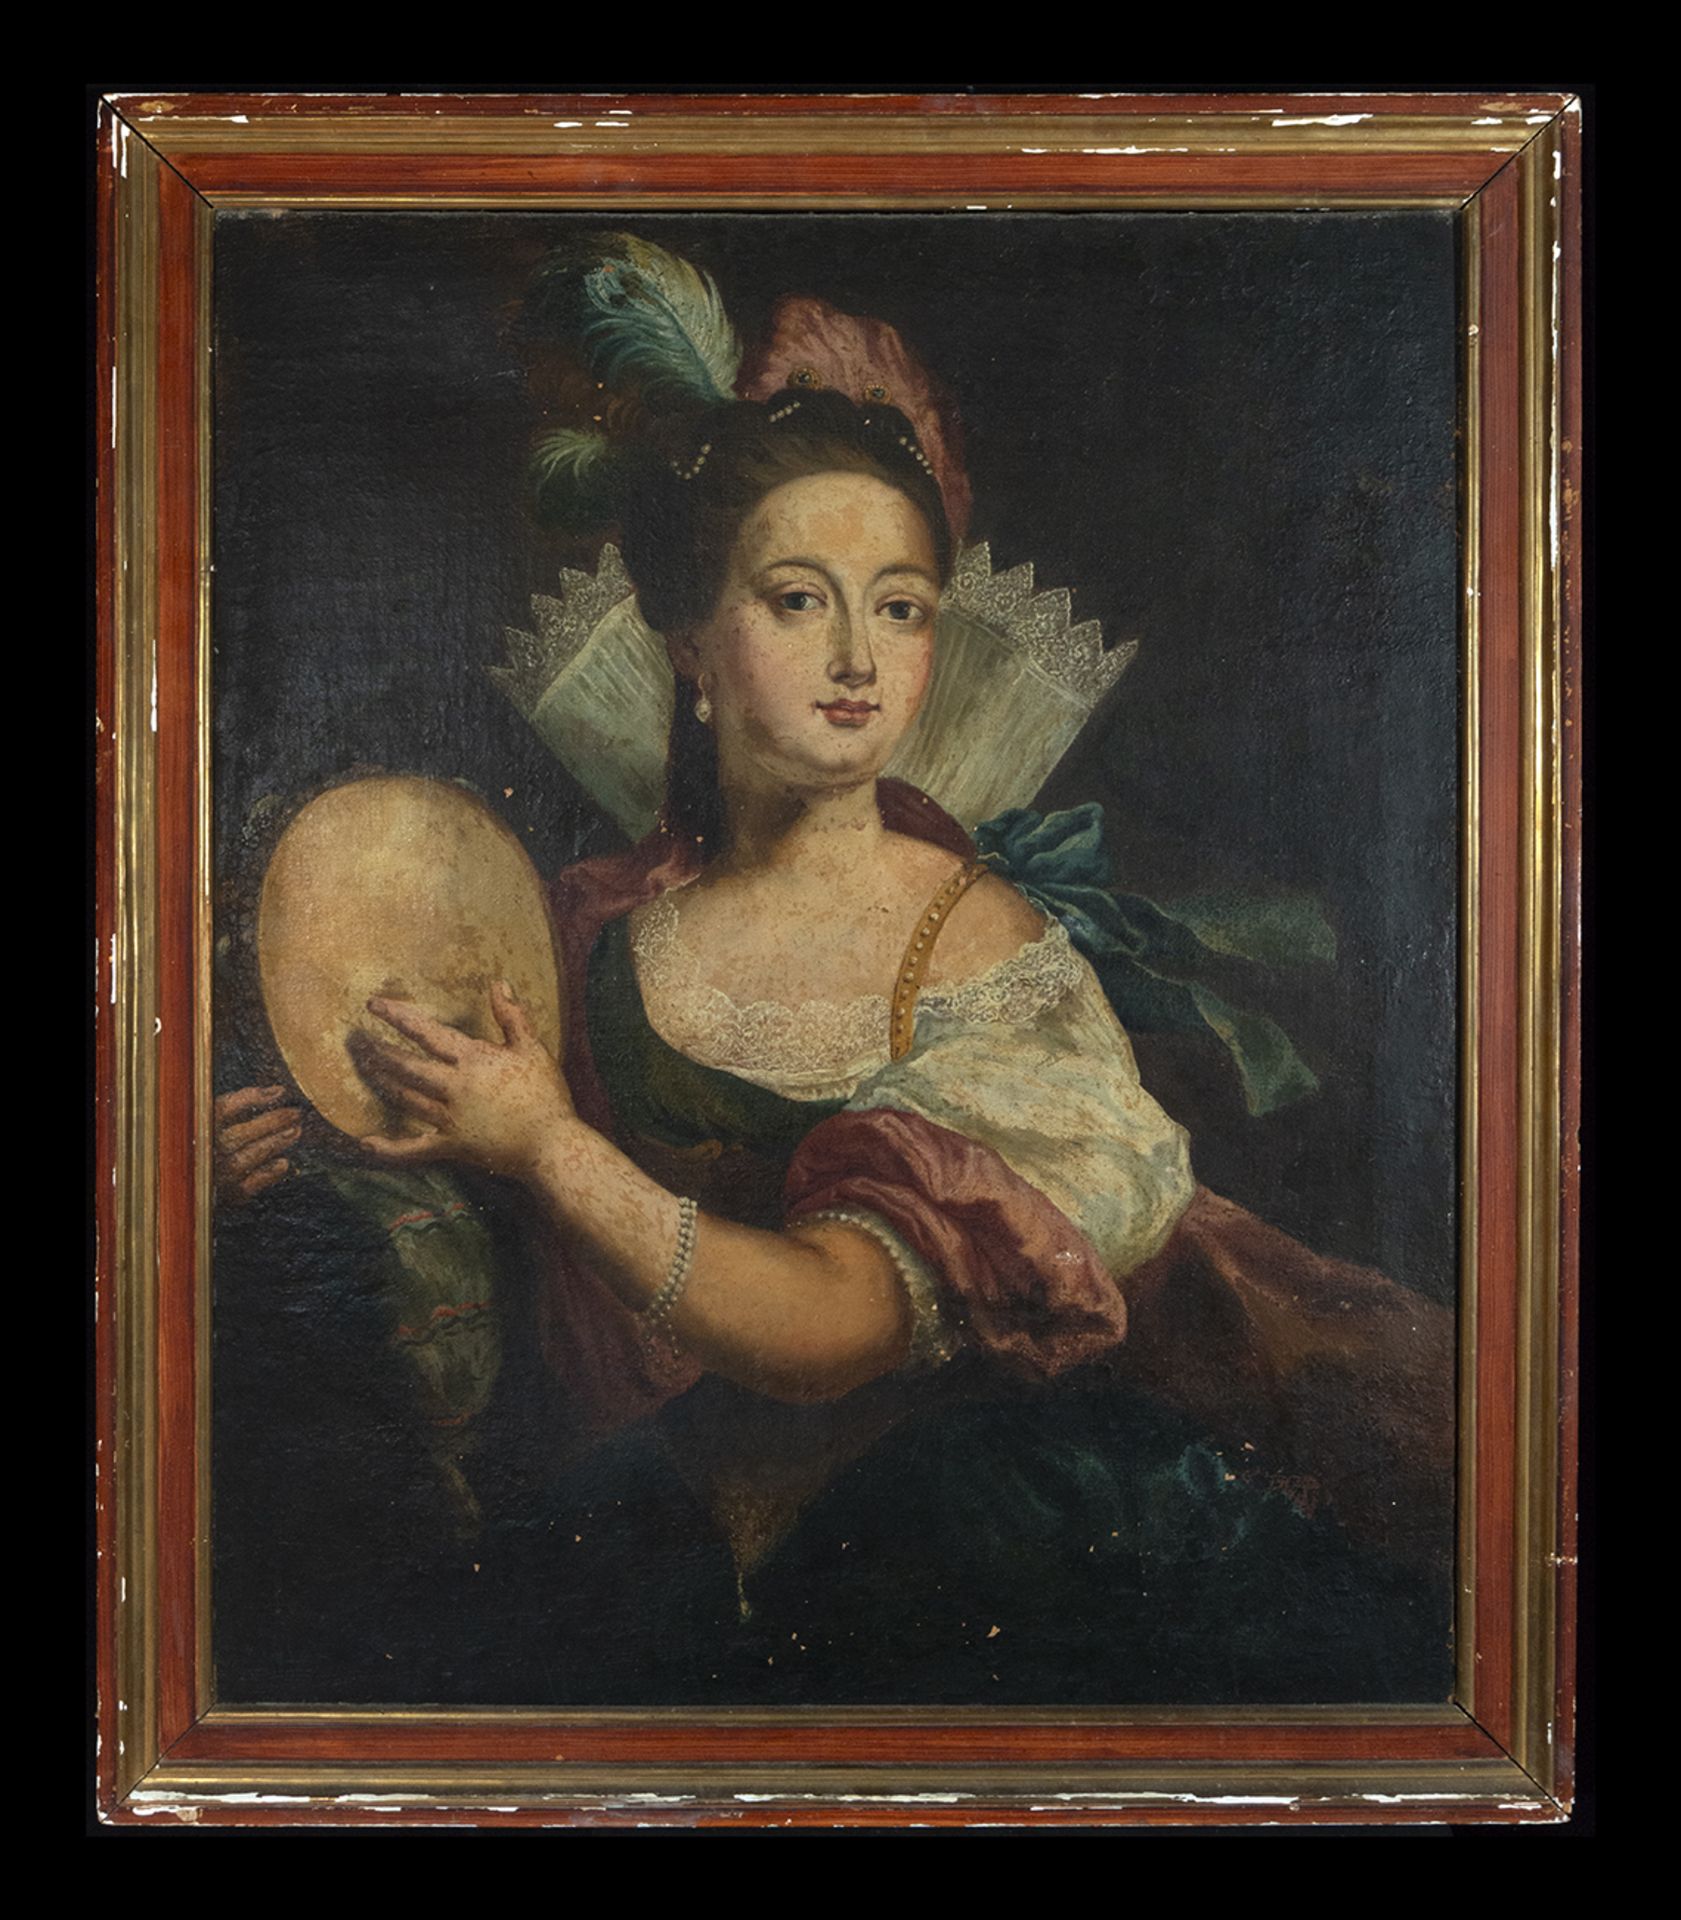 Portrait of Noble Lady playing the Drum, 18th century French school